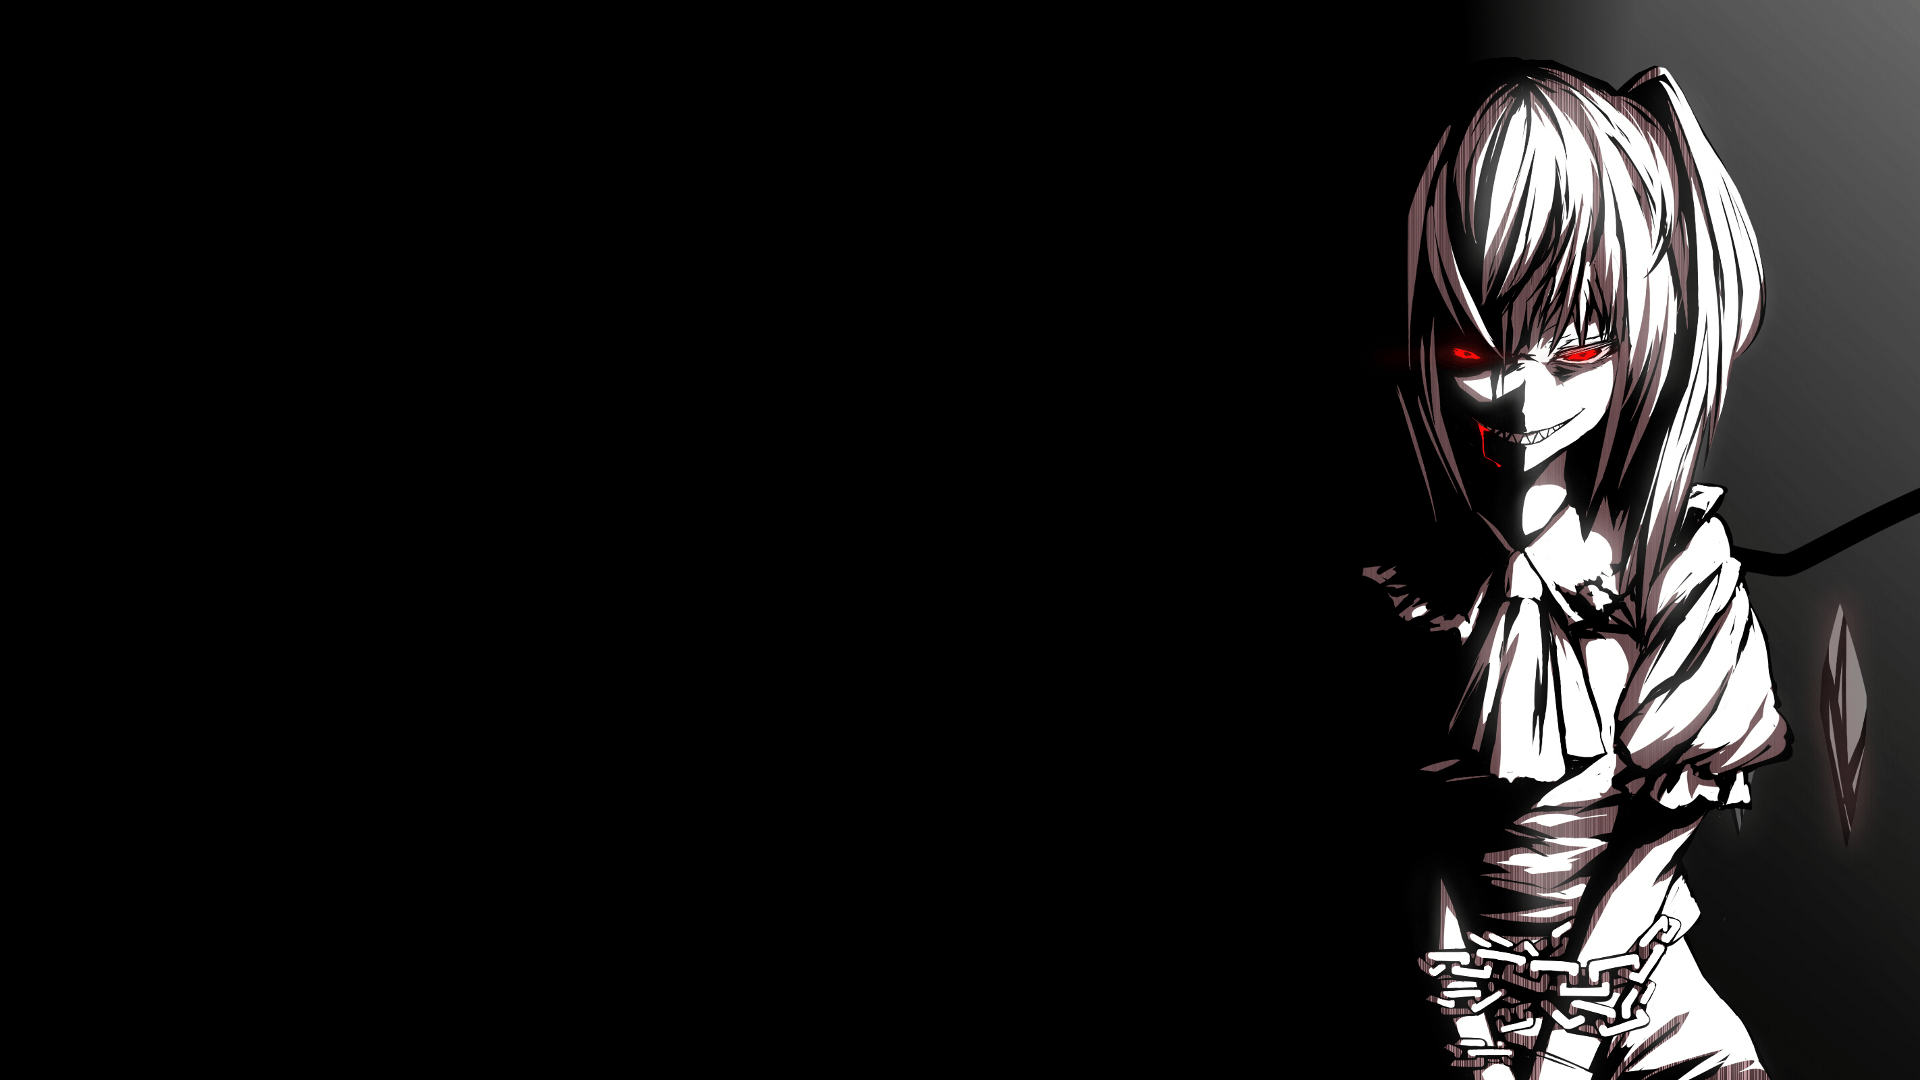 Scary anime girl wallpapers